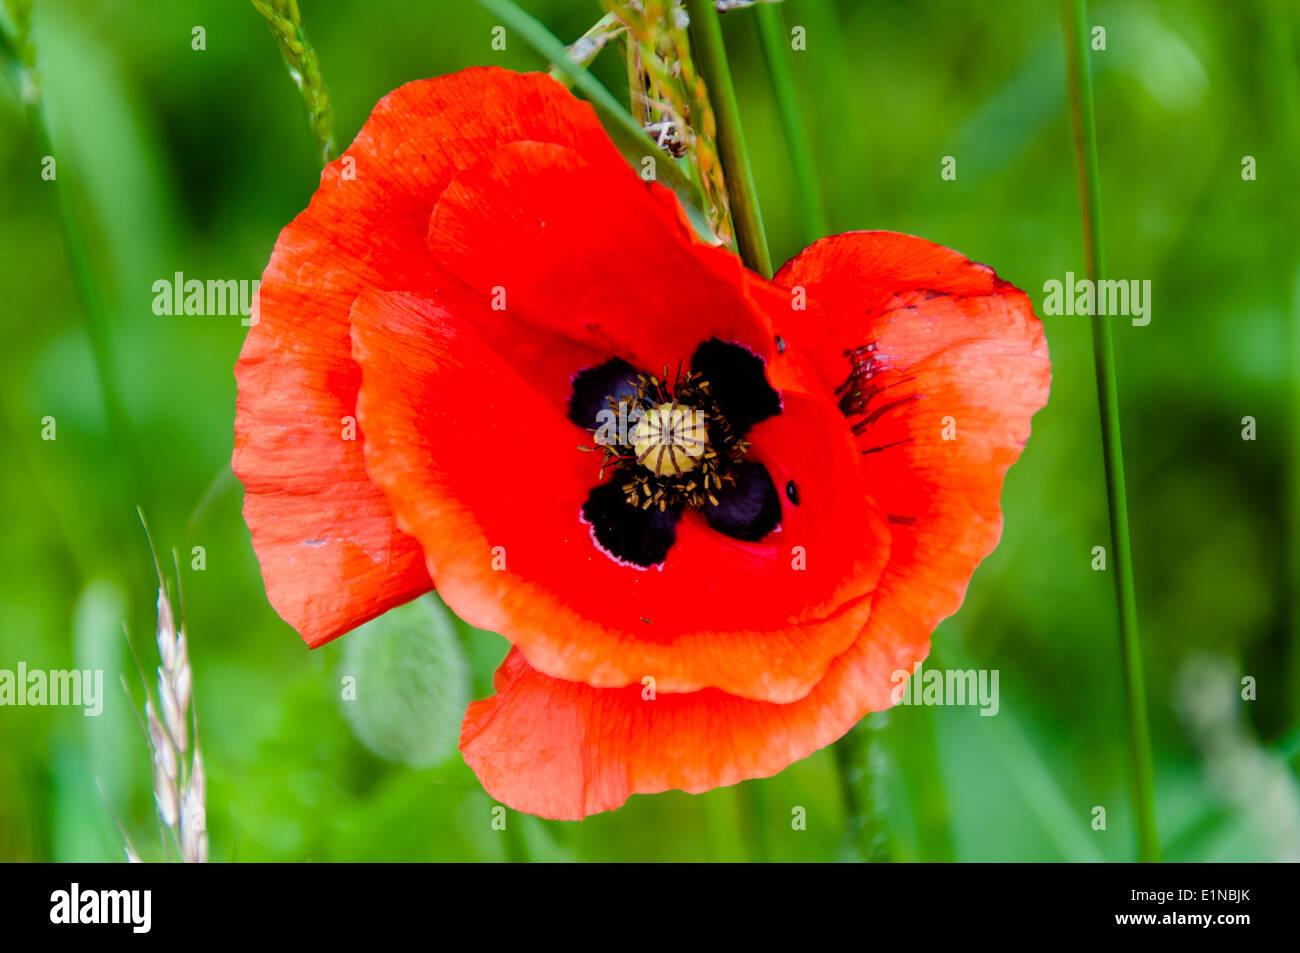 Poppy flower close up, memorial day, d day Stock Photo